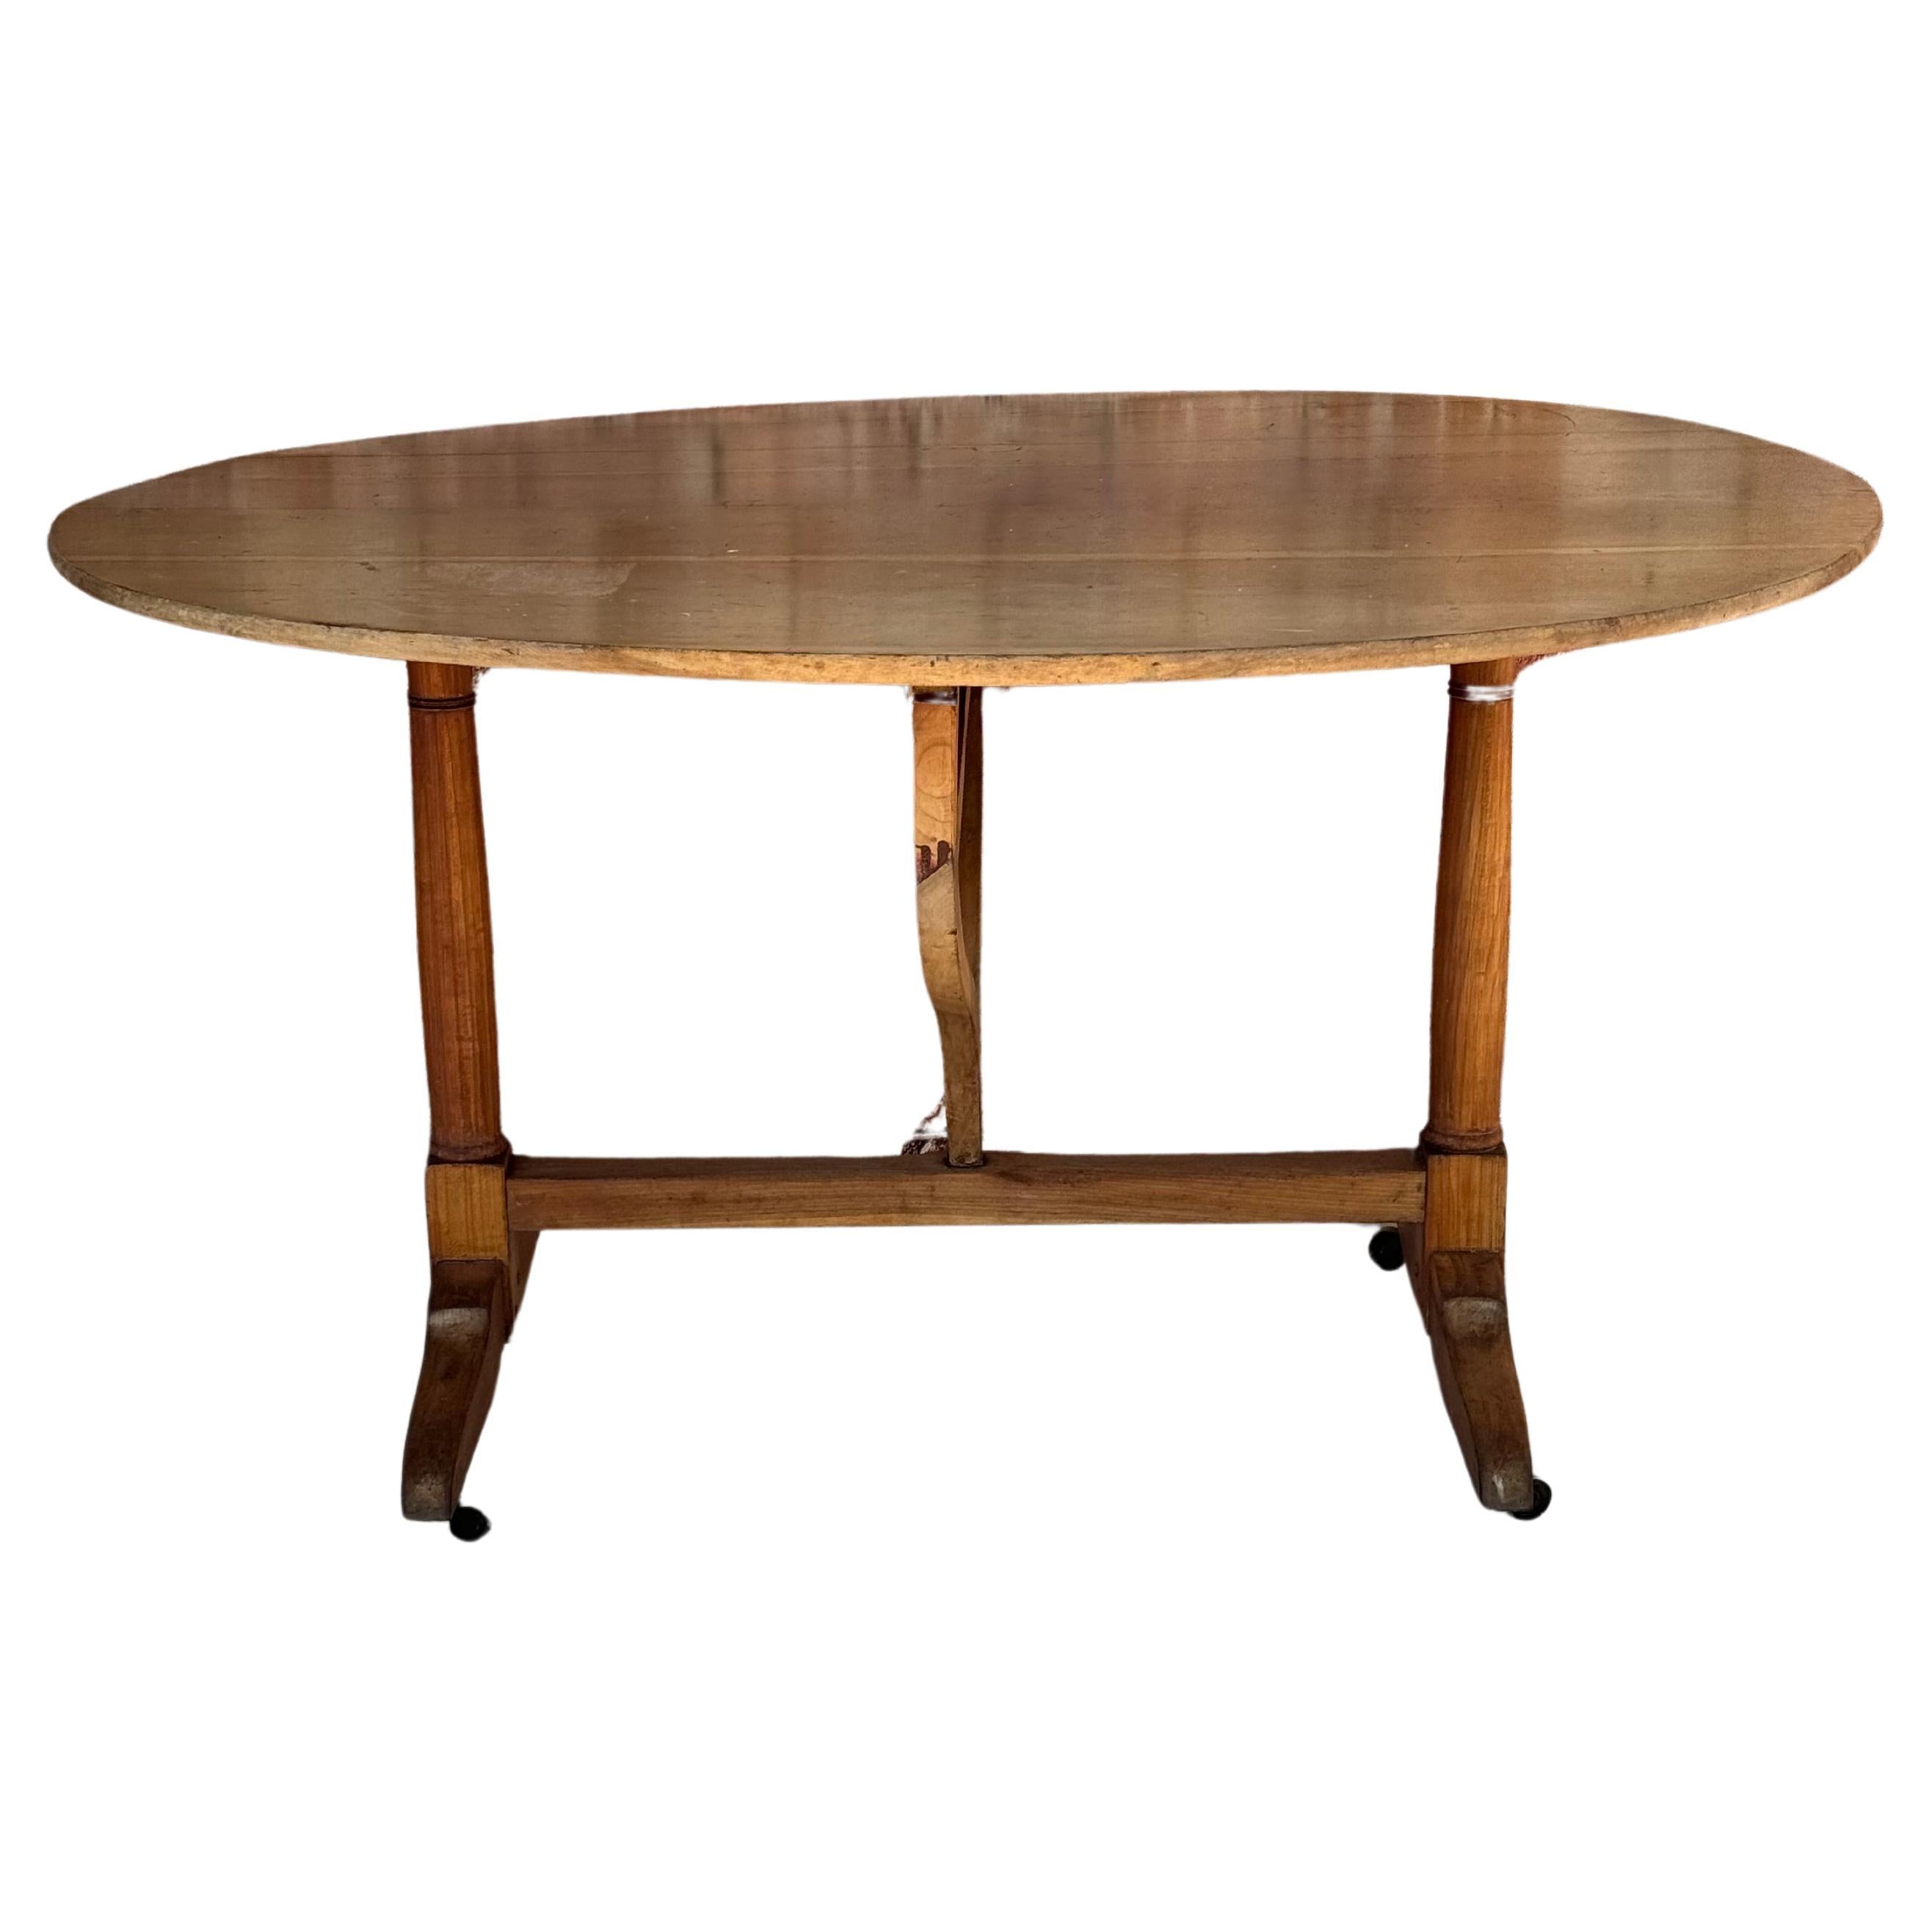 Large 19th century Tilt-top French wine tasting table. The top can be positioned vertically for storage and opened for use as a side or dining table.
Dimensions when tilted up:
49